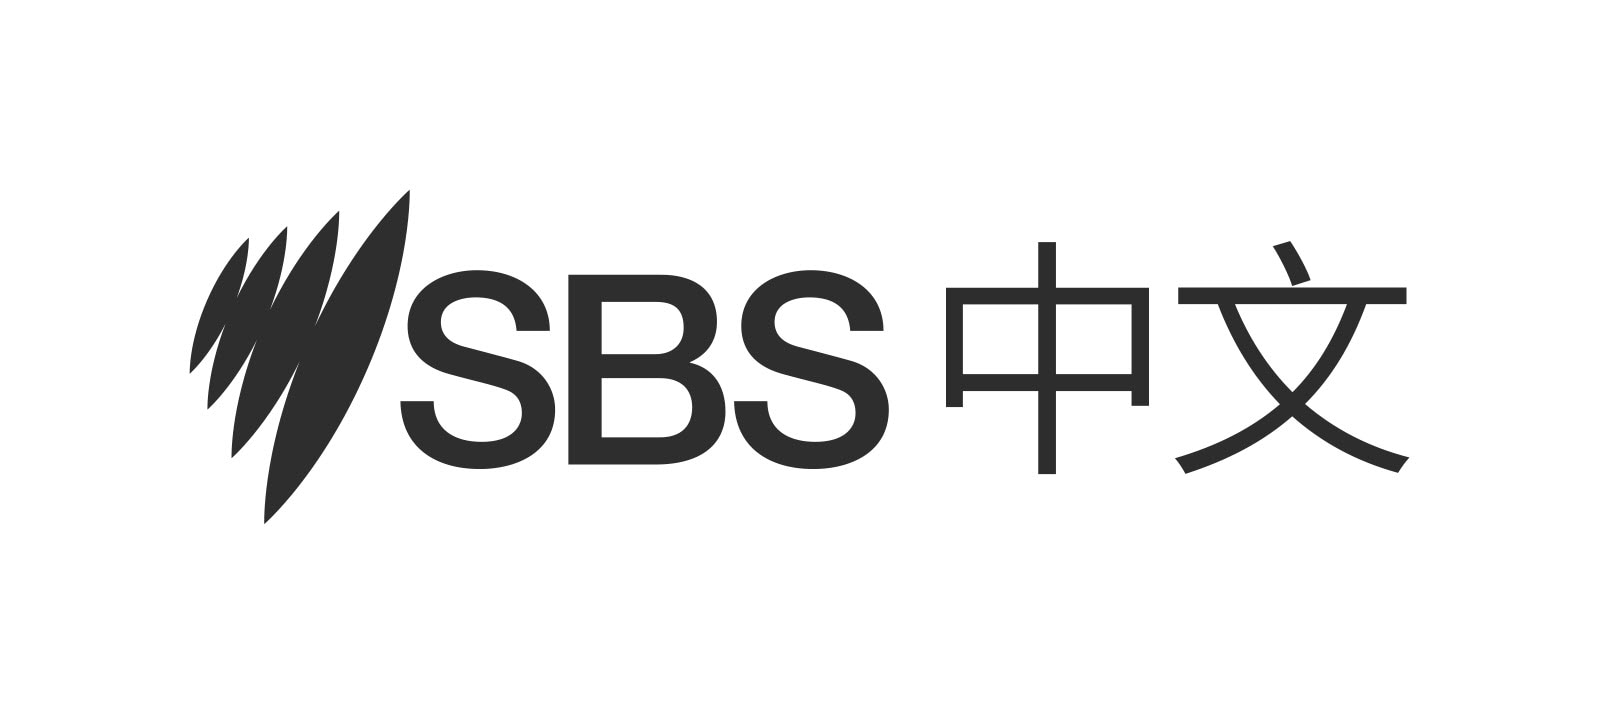 SBS is launching a new Chinese-language digital service. Source: SBS.